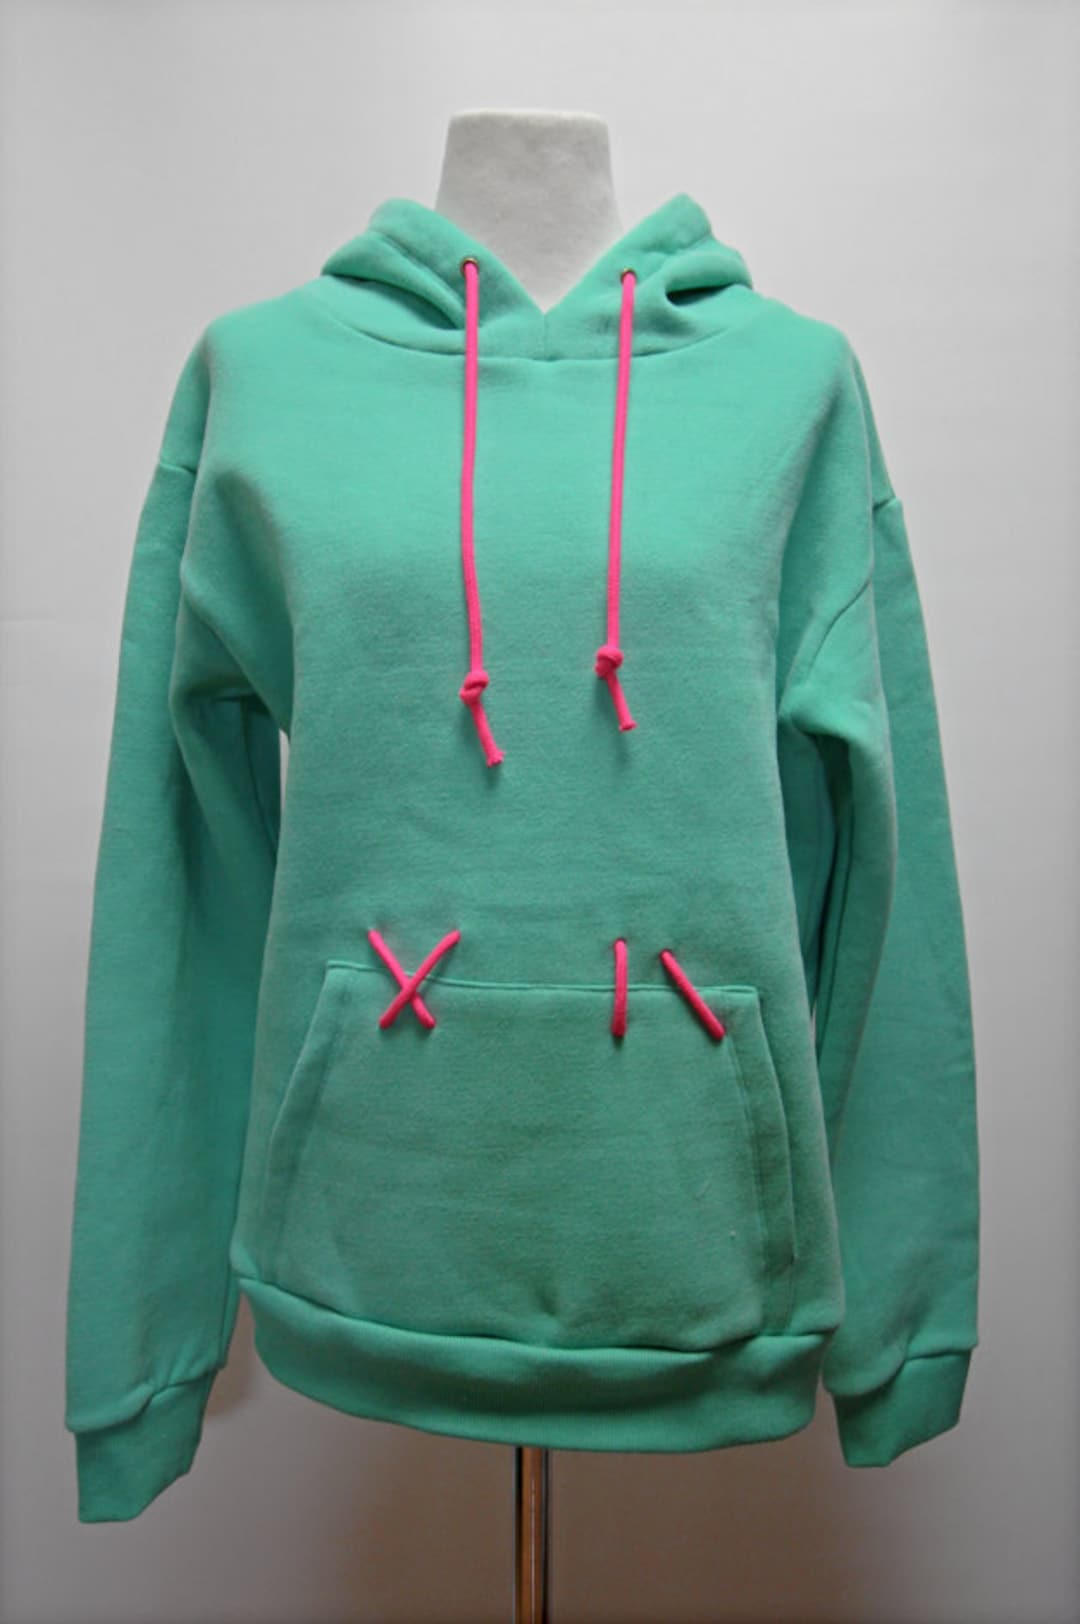 Vanellope Costume Hoodie From Ralph Breaks the Internet and Wreck